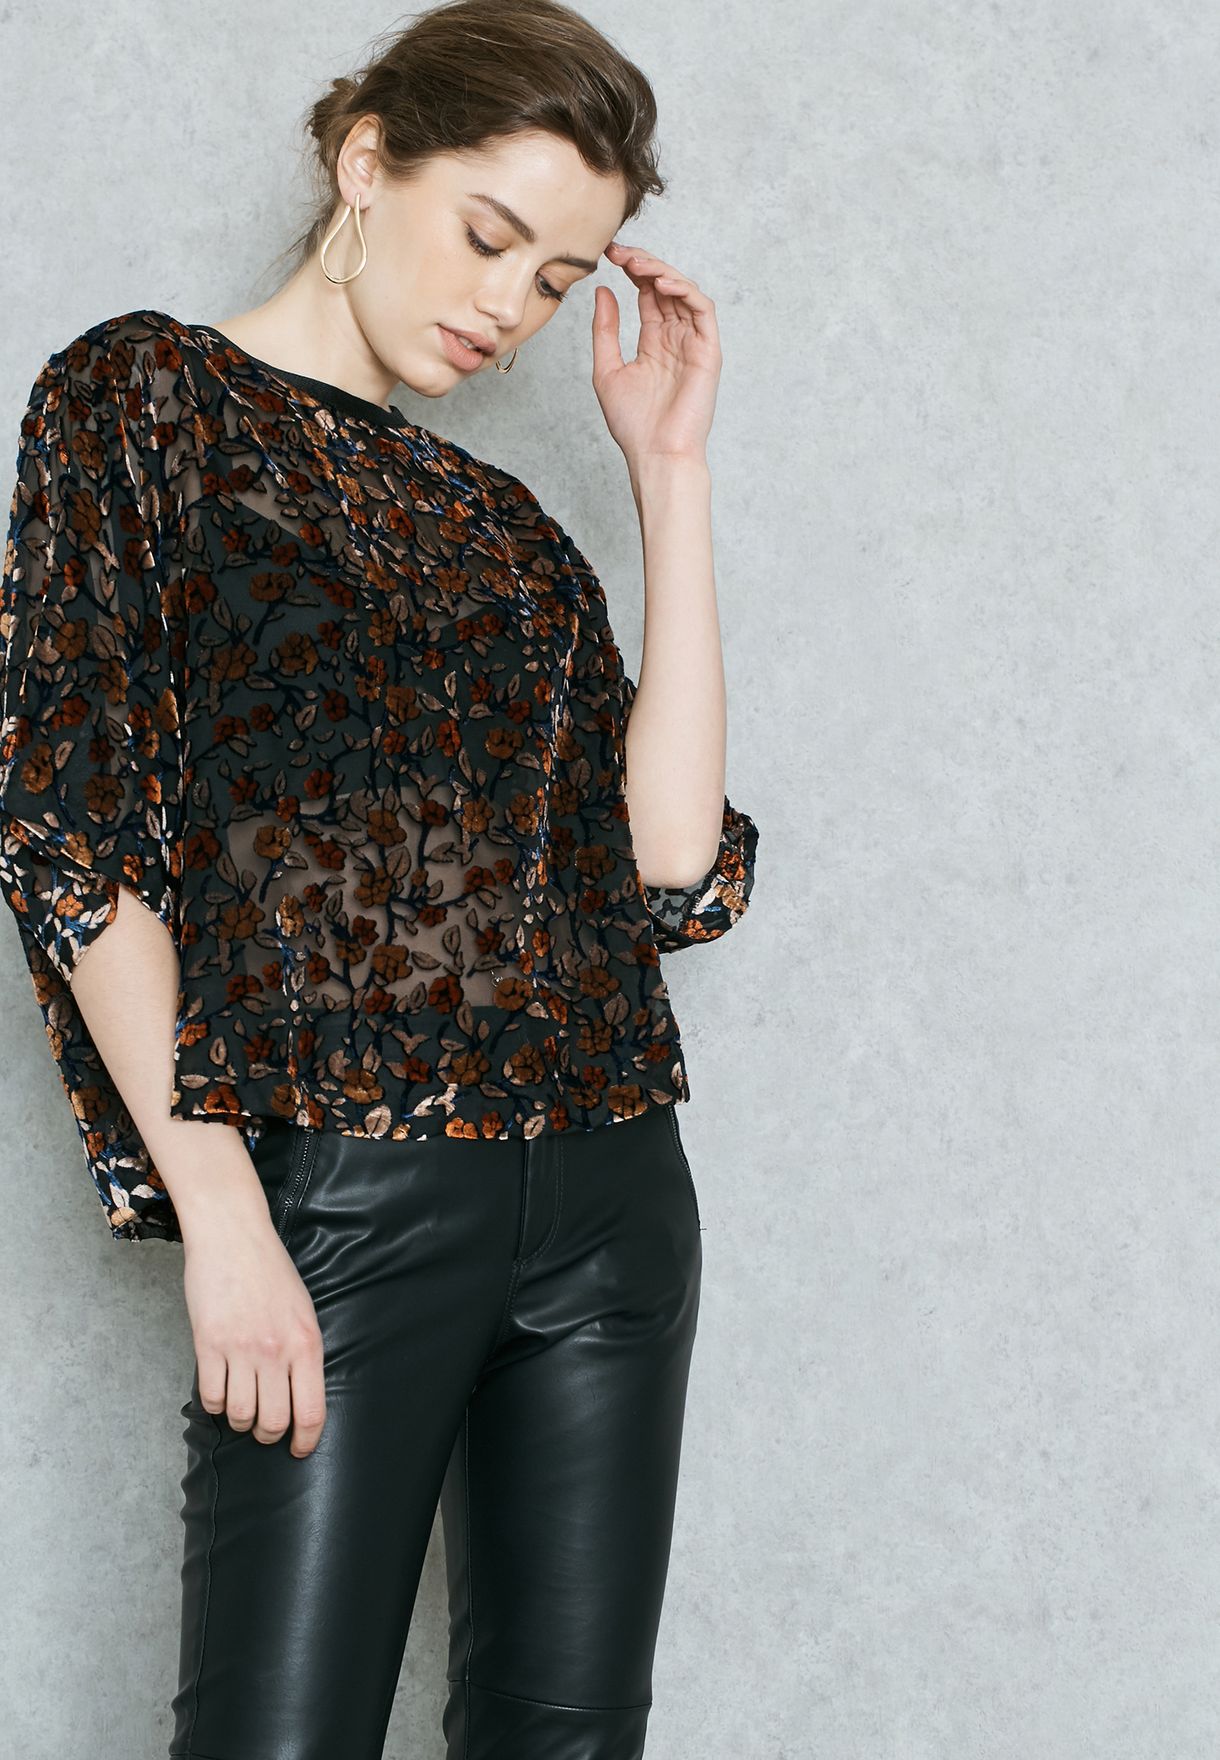 black sheer embroidered top